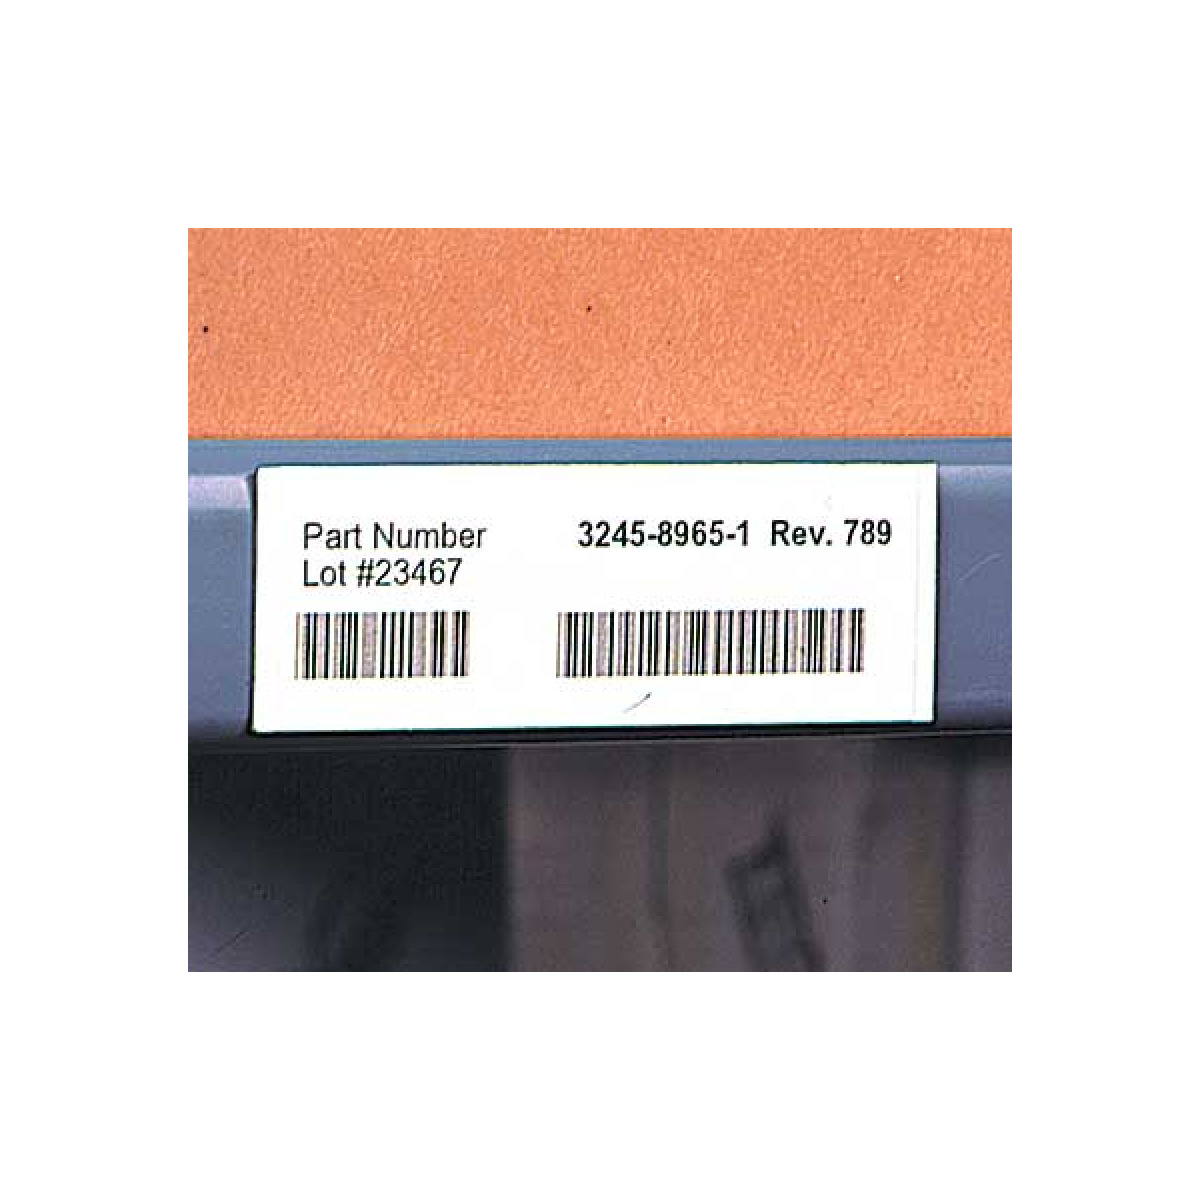 Warehouse shelf magnet with bar code label